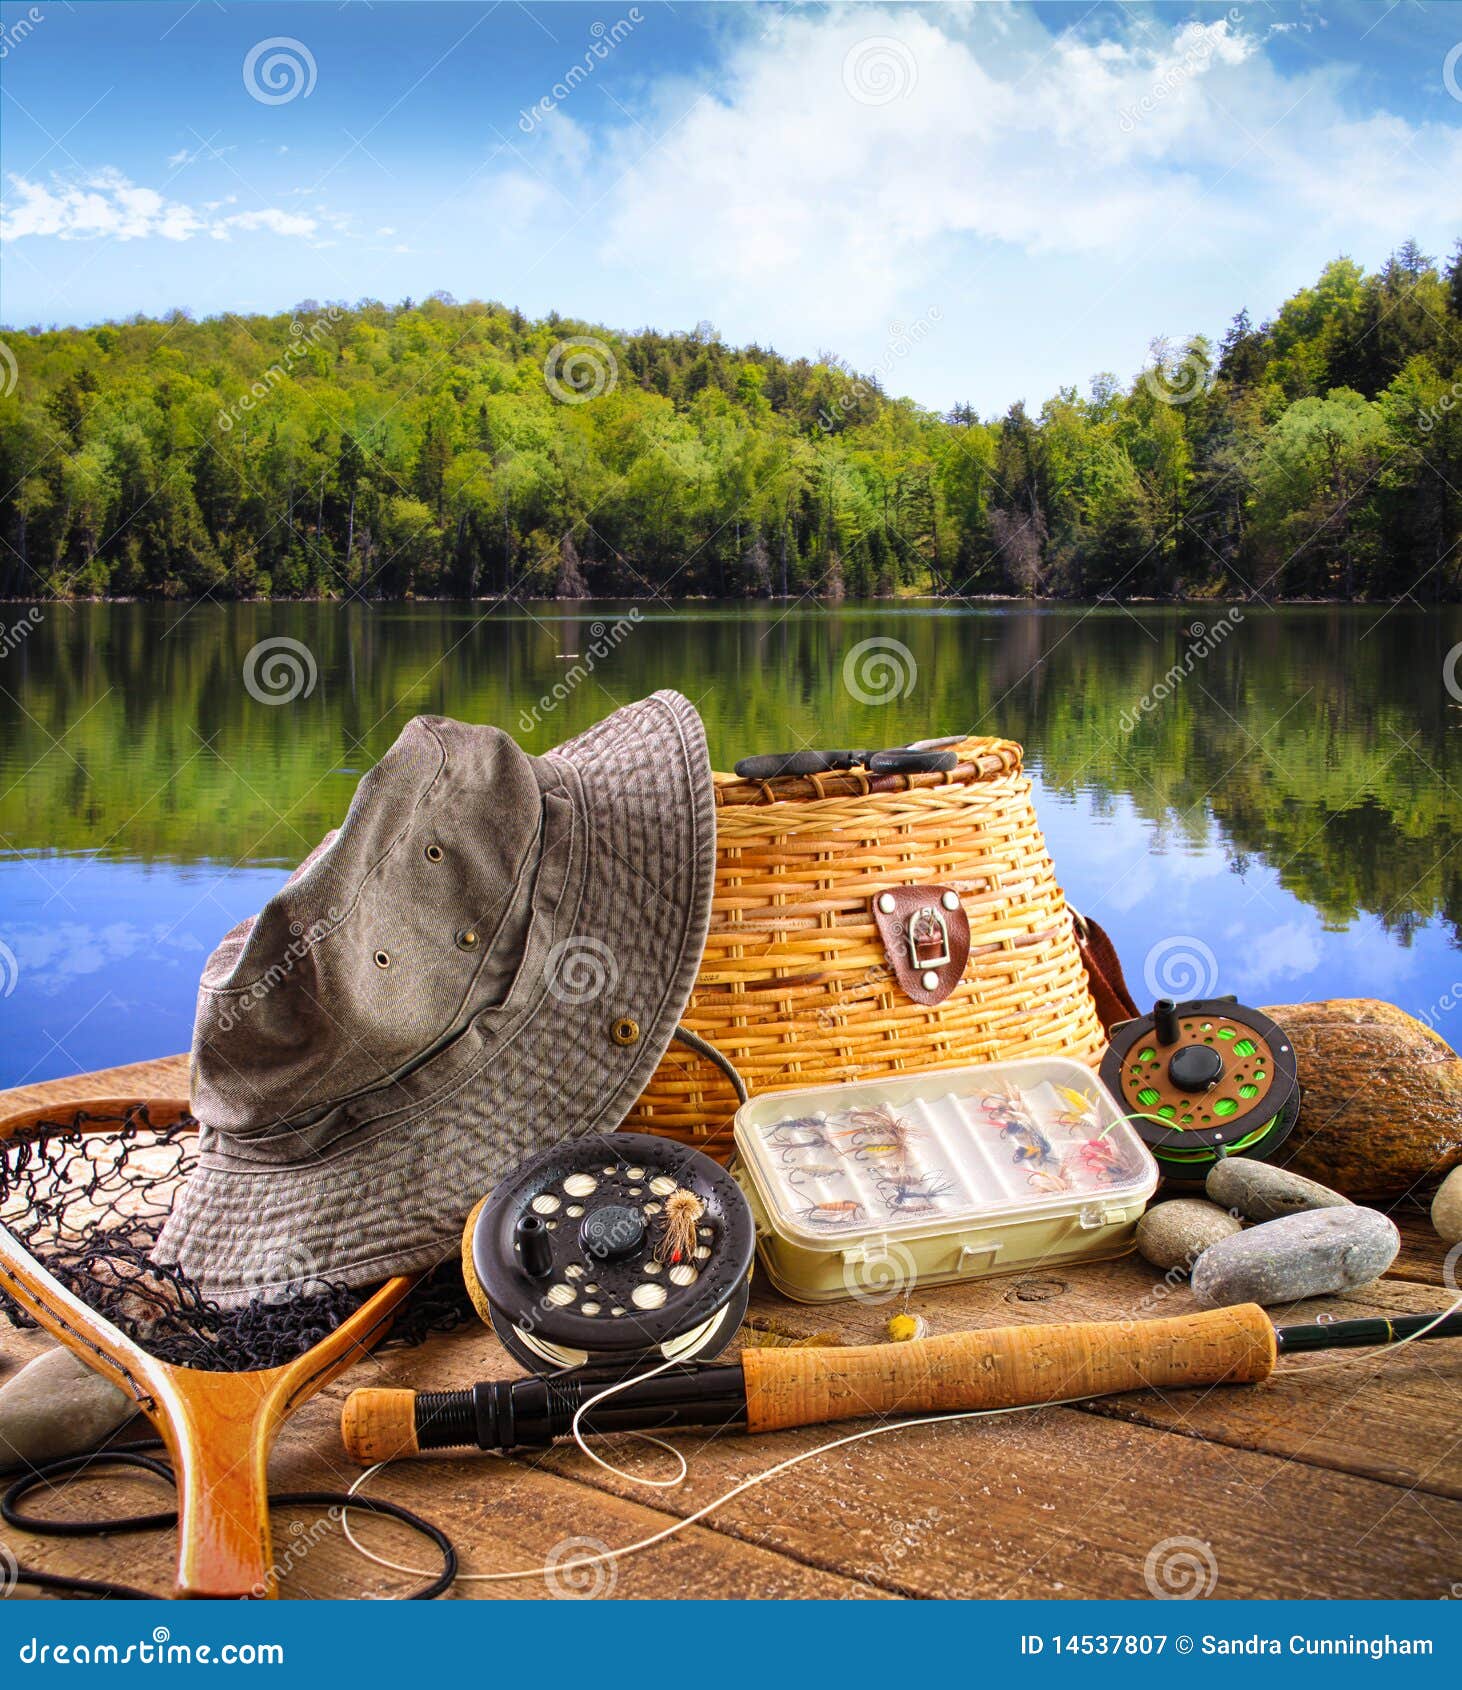 Fly Fishing Equipment Near a Lake Stock Image - Image of hook, equipment:  14537807